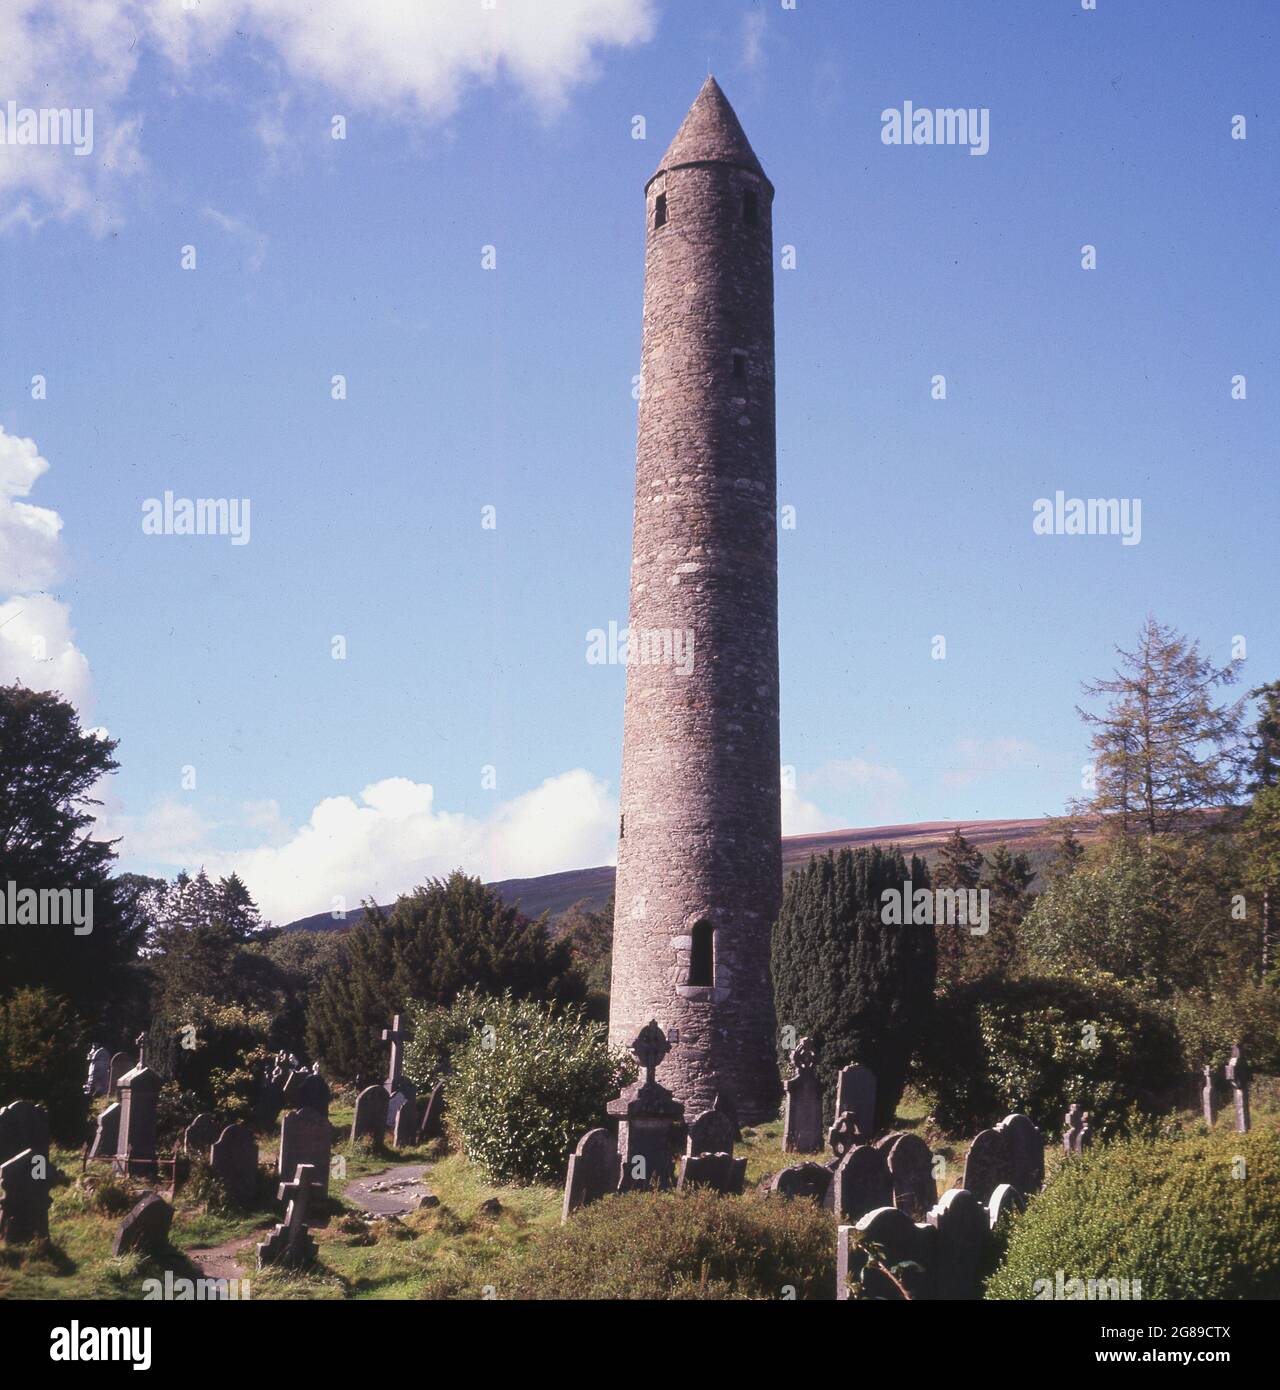 1960s, historical view from this era of The Round Tower standing in a graveyard at a cemetery at the ancient monastic site of Glendalough at Wicklow, Ireland. The most famous of all the landmarks in Glendalough, the Round Tower is 33 metres high and was built around 1000 years ago by the monks of St. Kevin’s monastery. Stock Photo